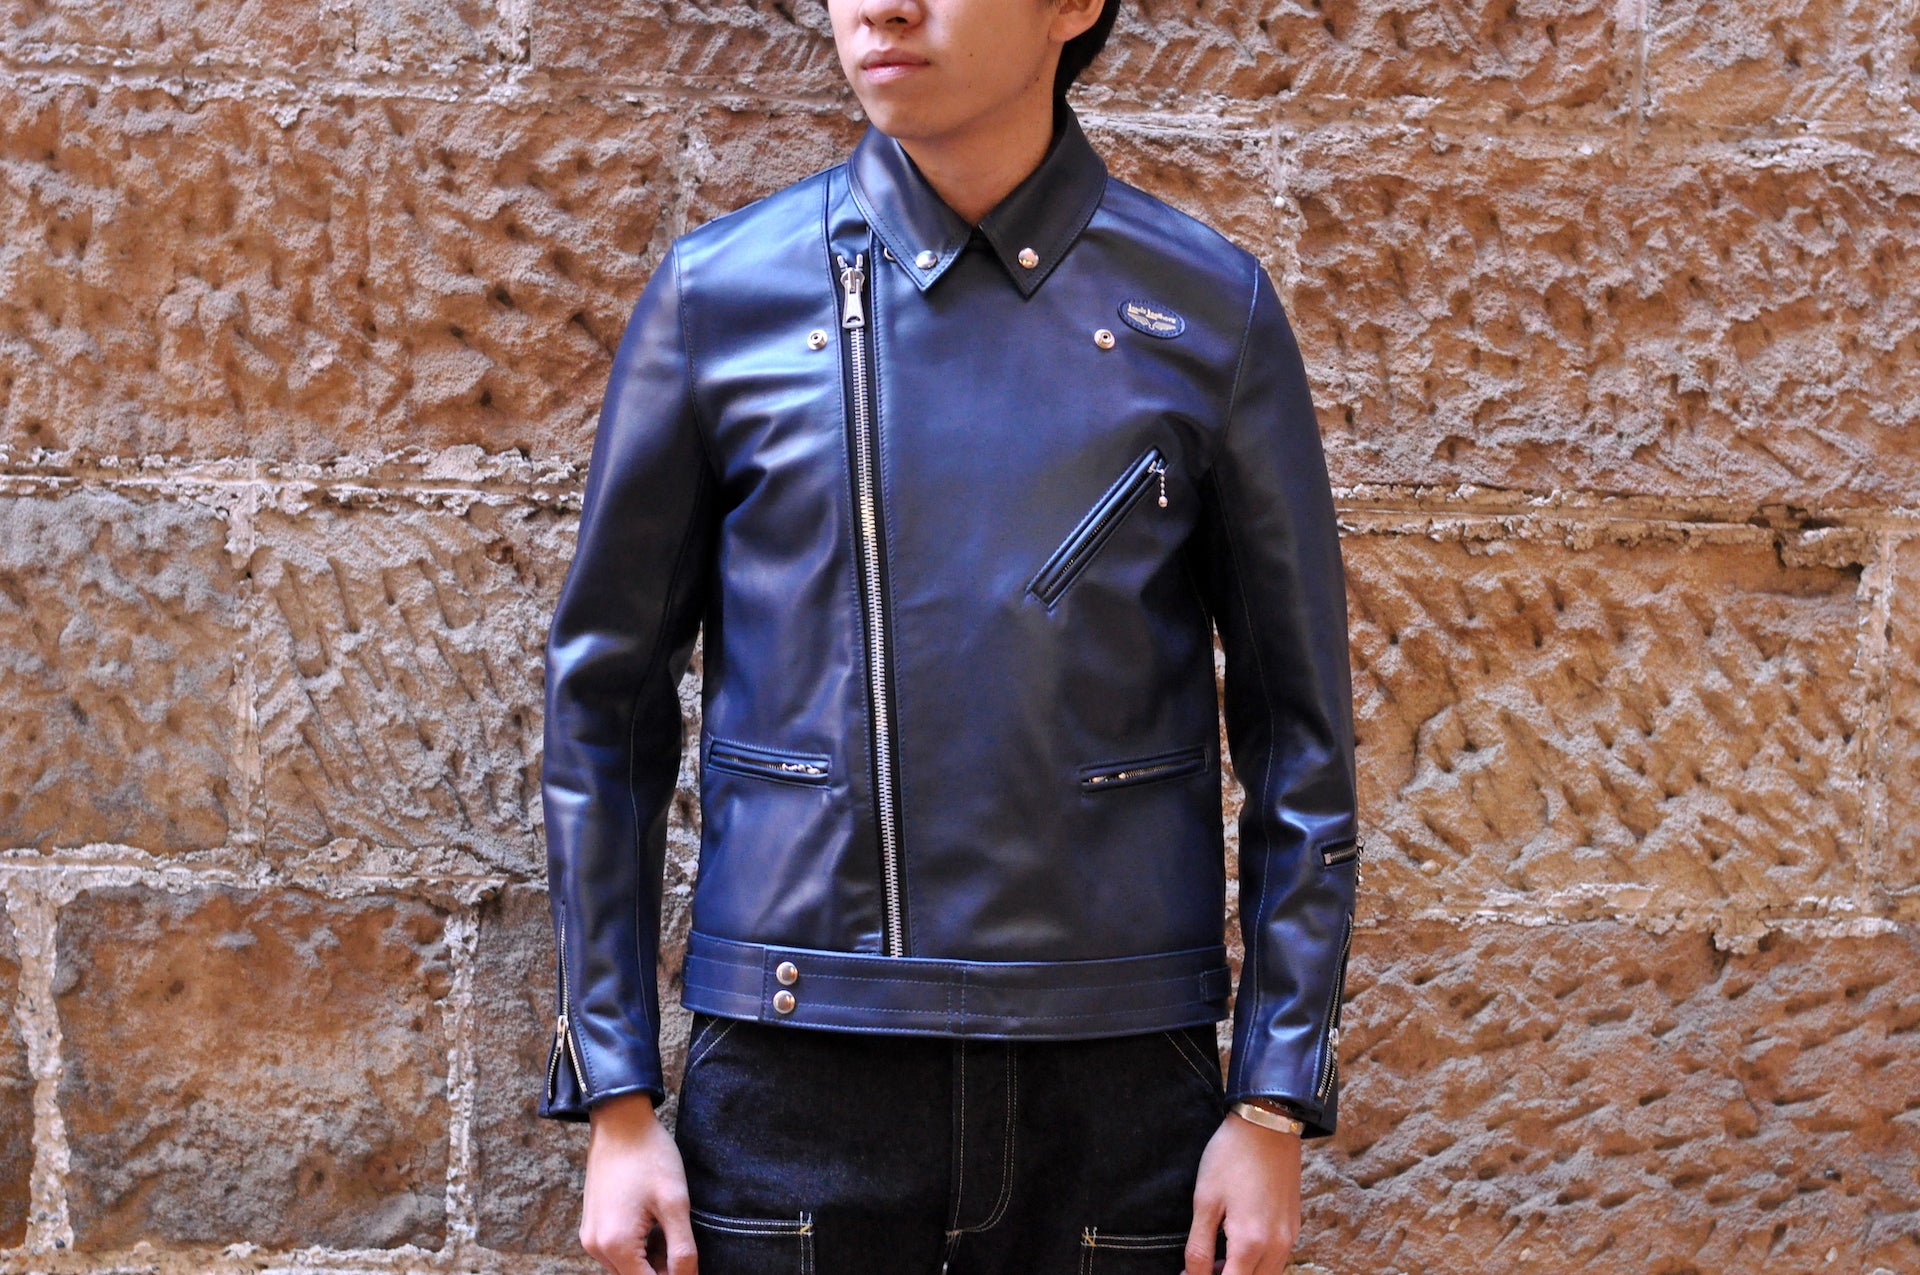 Lewis Leathers Biker Jackets and Accessories